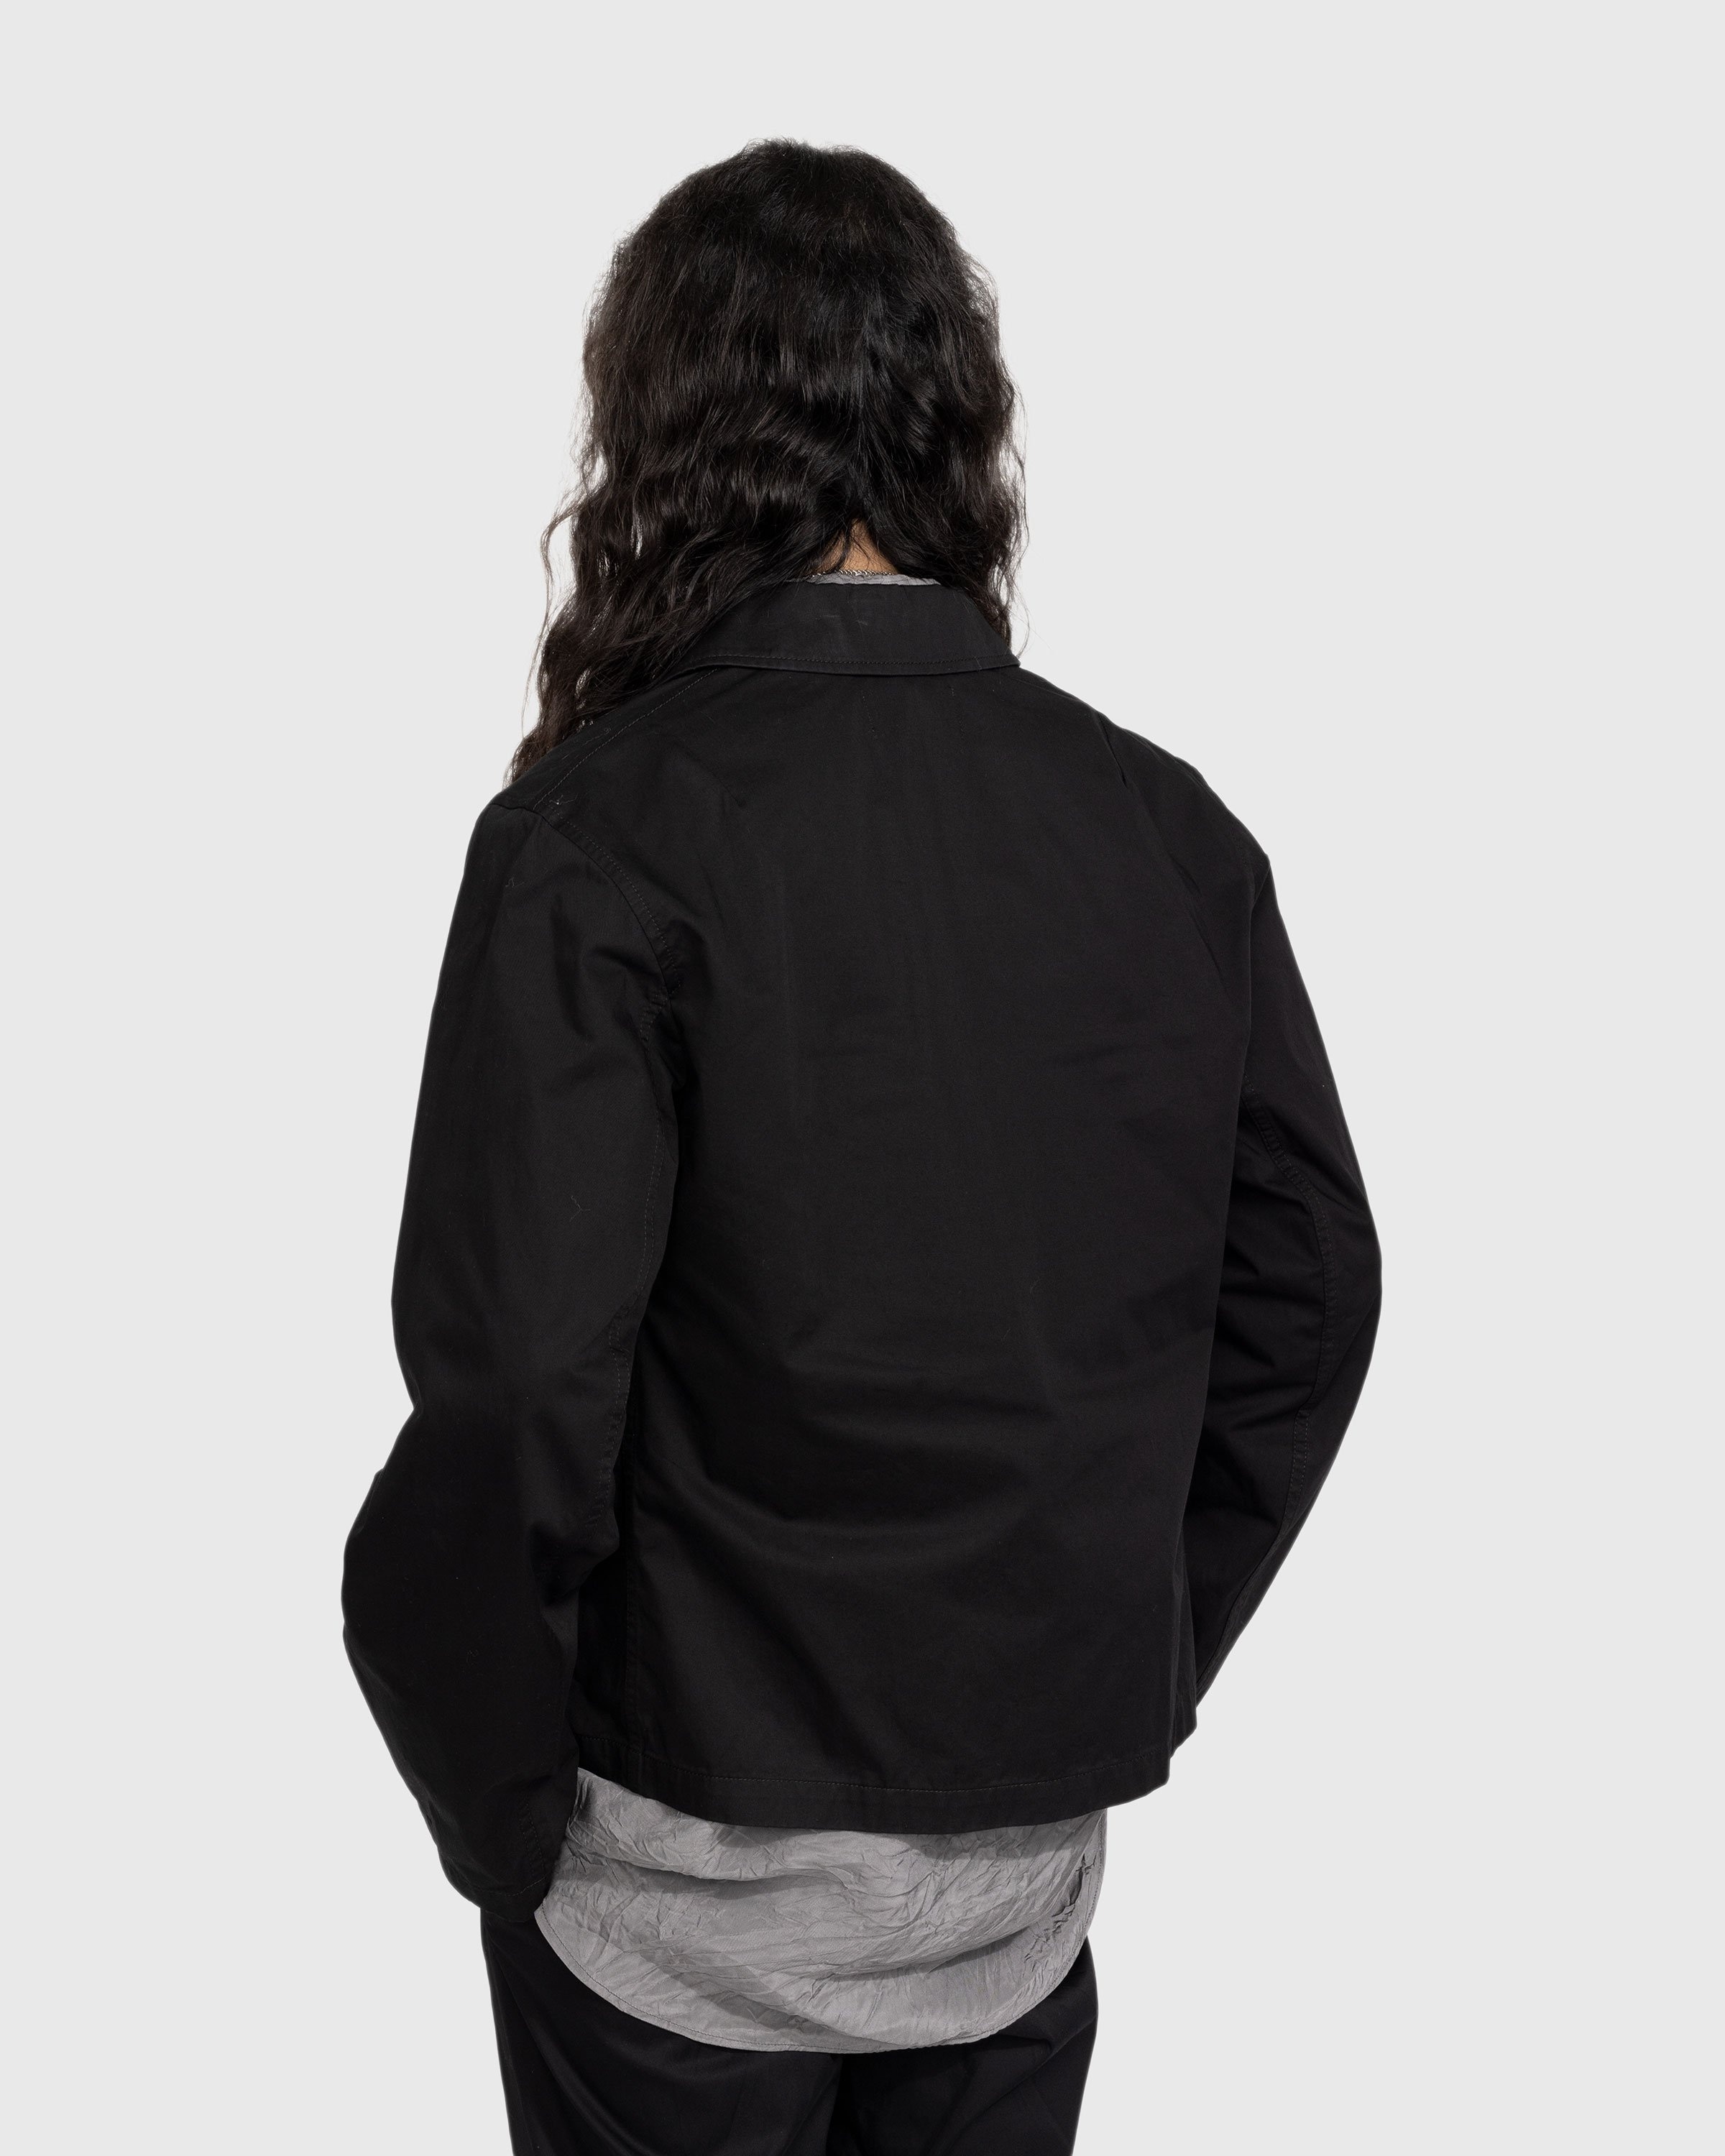 Lemaire – Military Overshirt Black - Outerwear - Black - Image 3